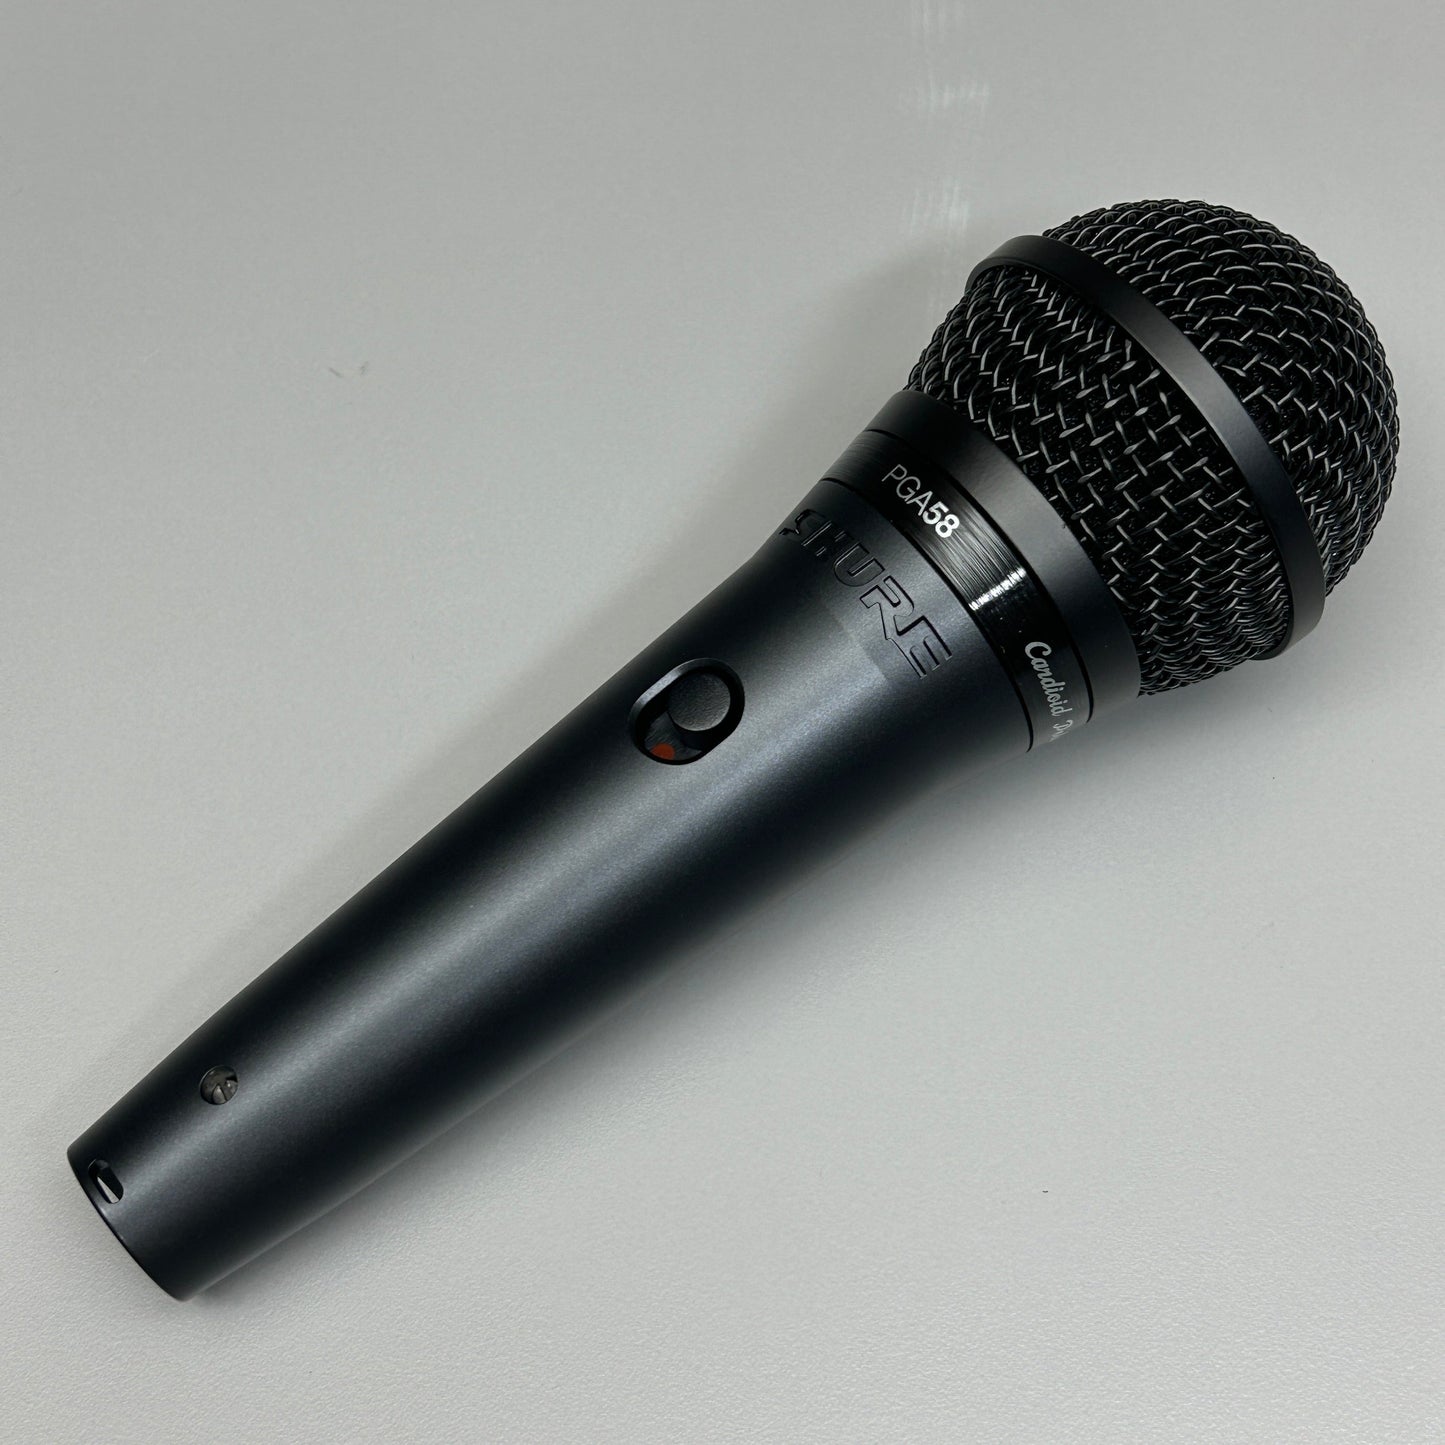 Shure SM58 Cardioid Dynamic Vocal Microphone & XLR Cable